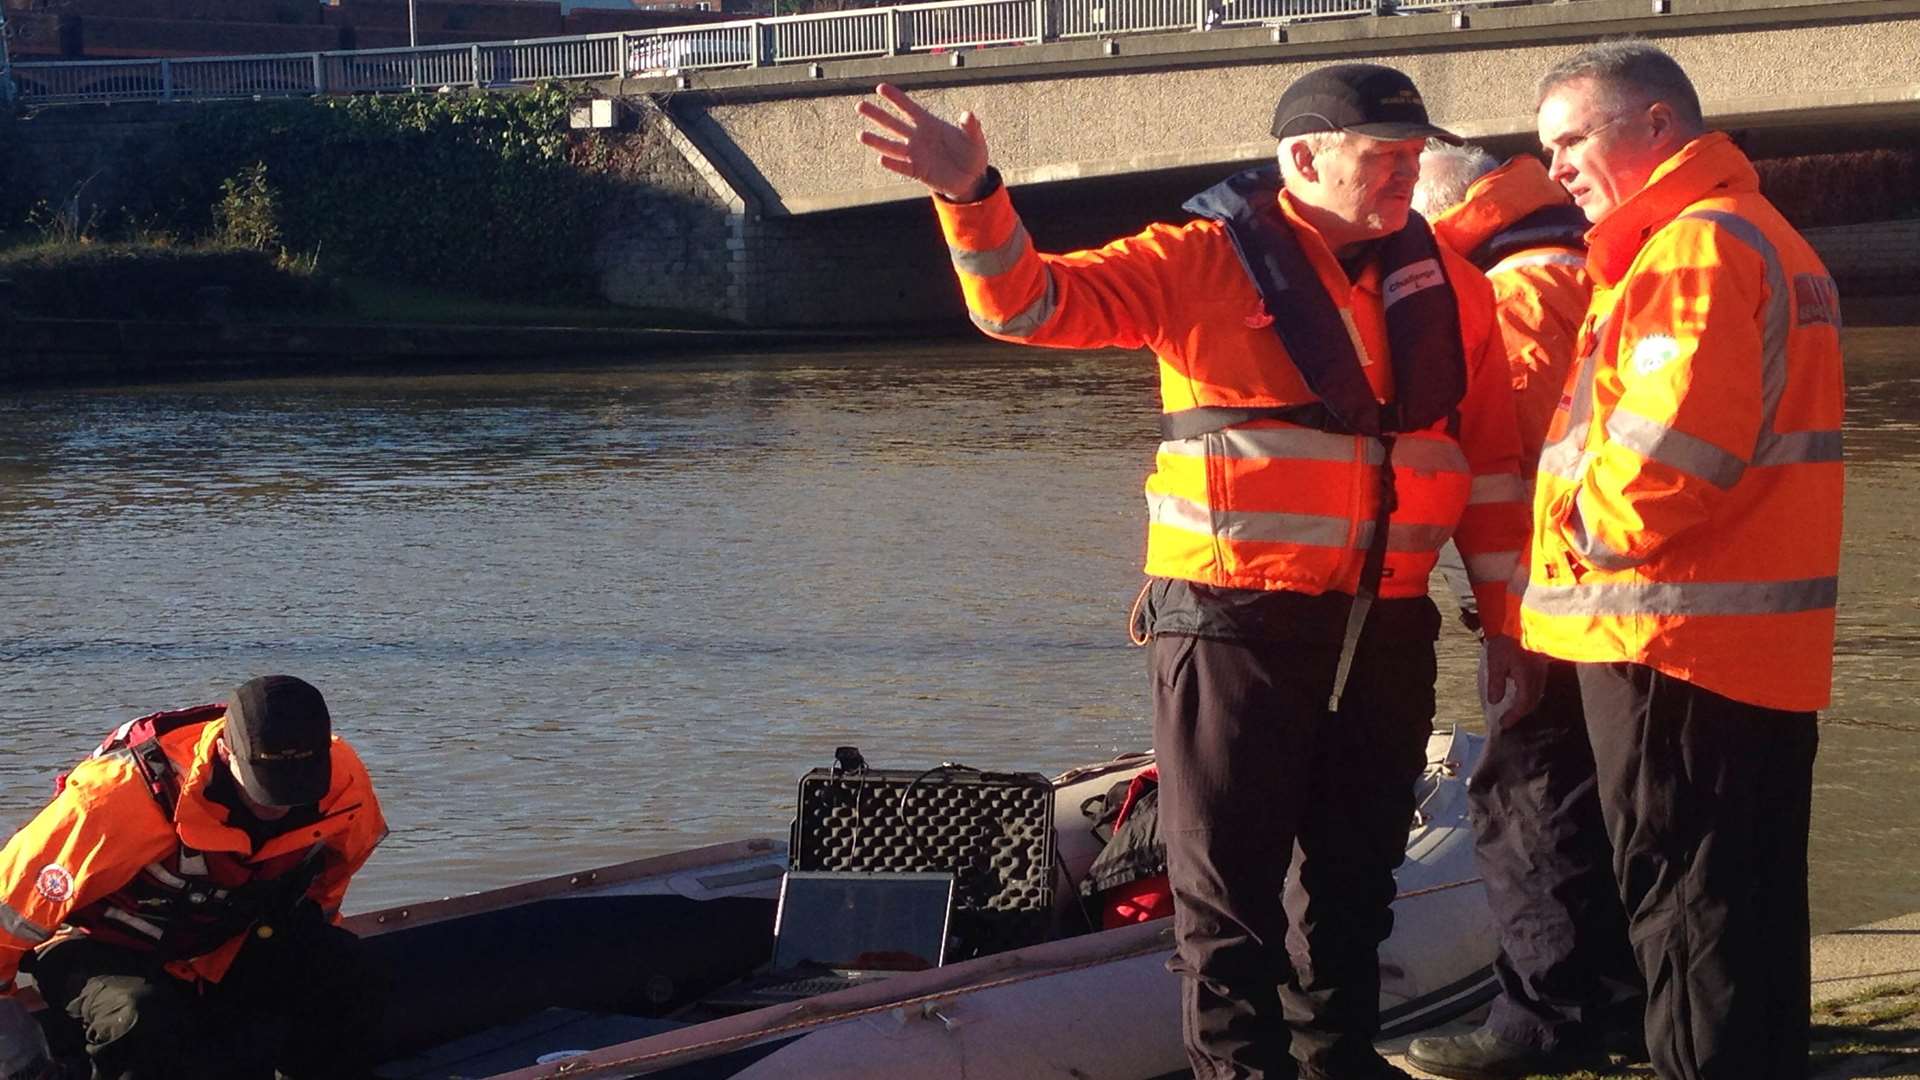 Specialist teams used sonar in the search for Pat Lamb last week